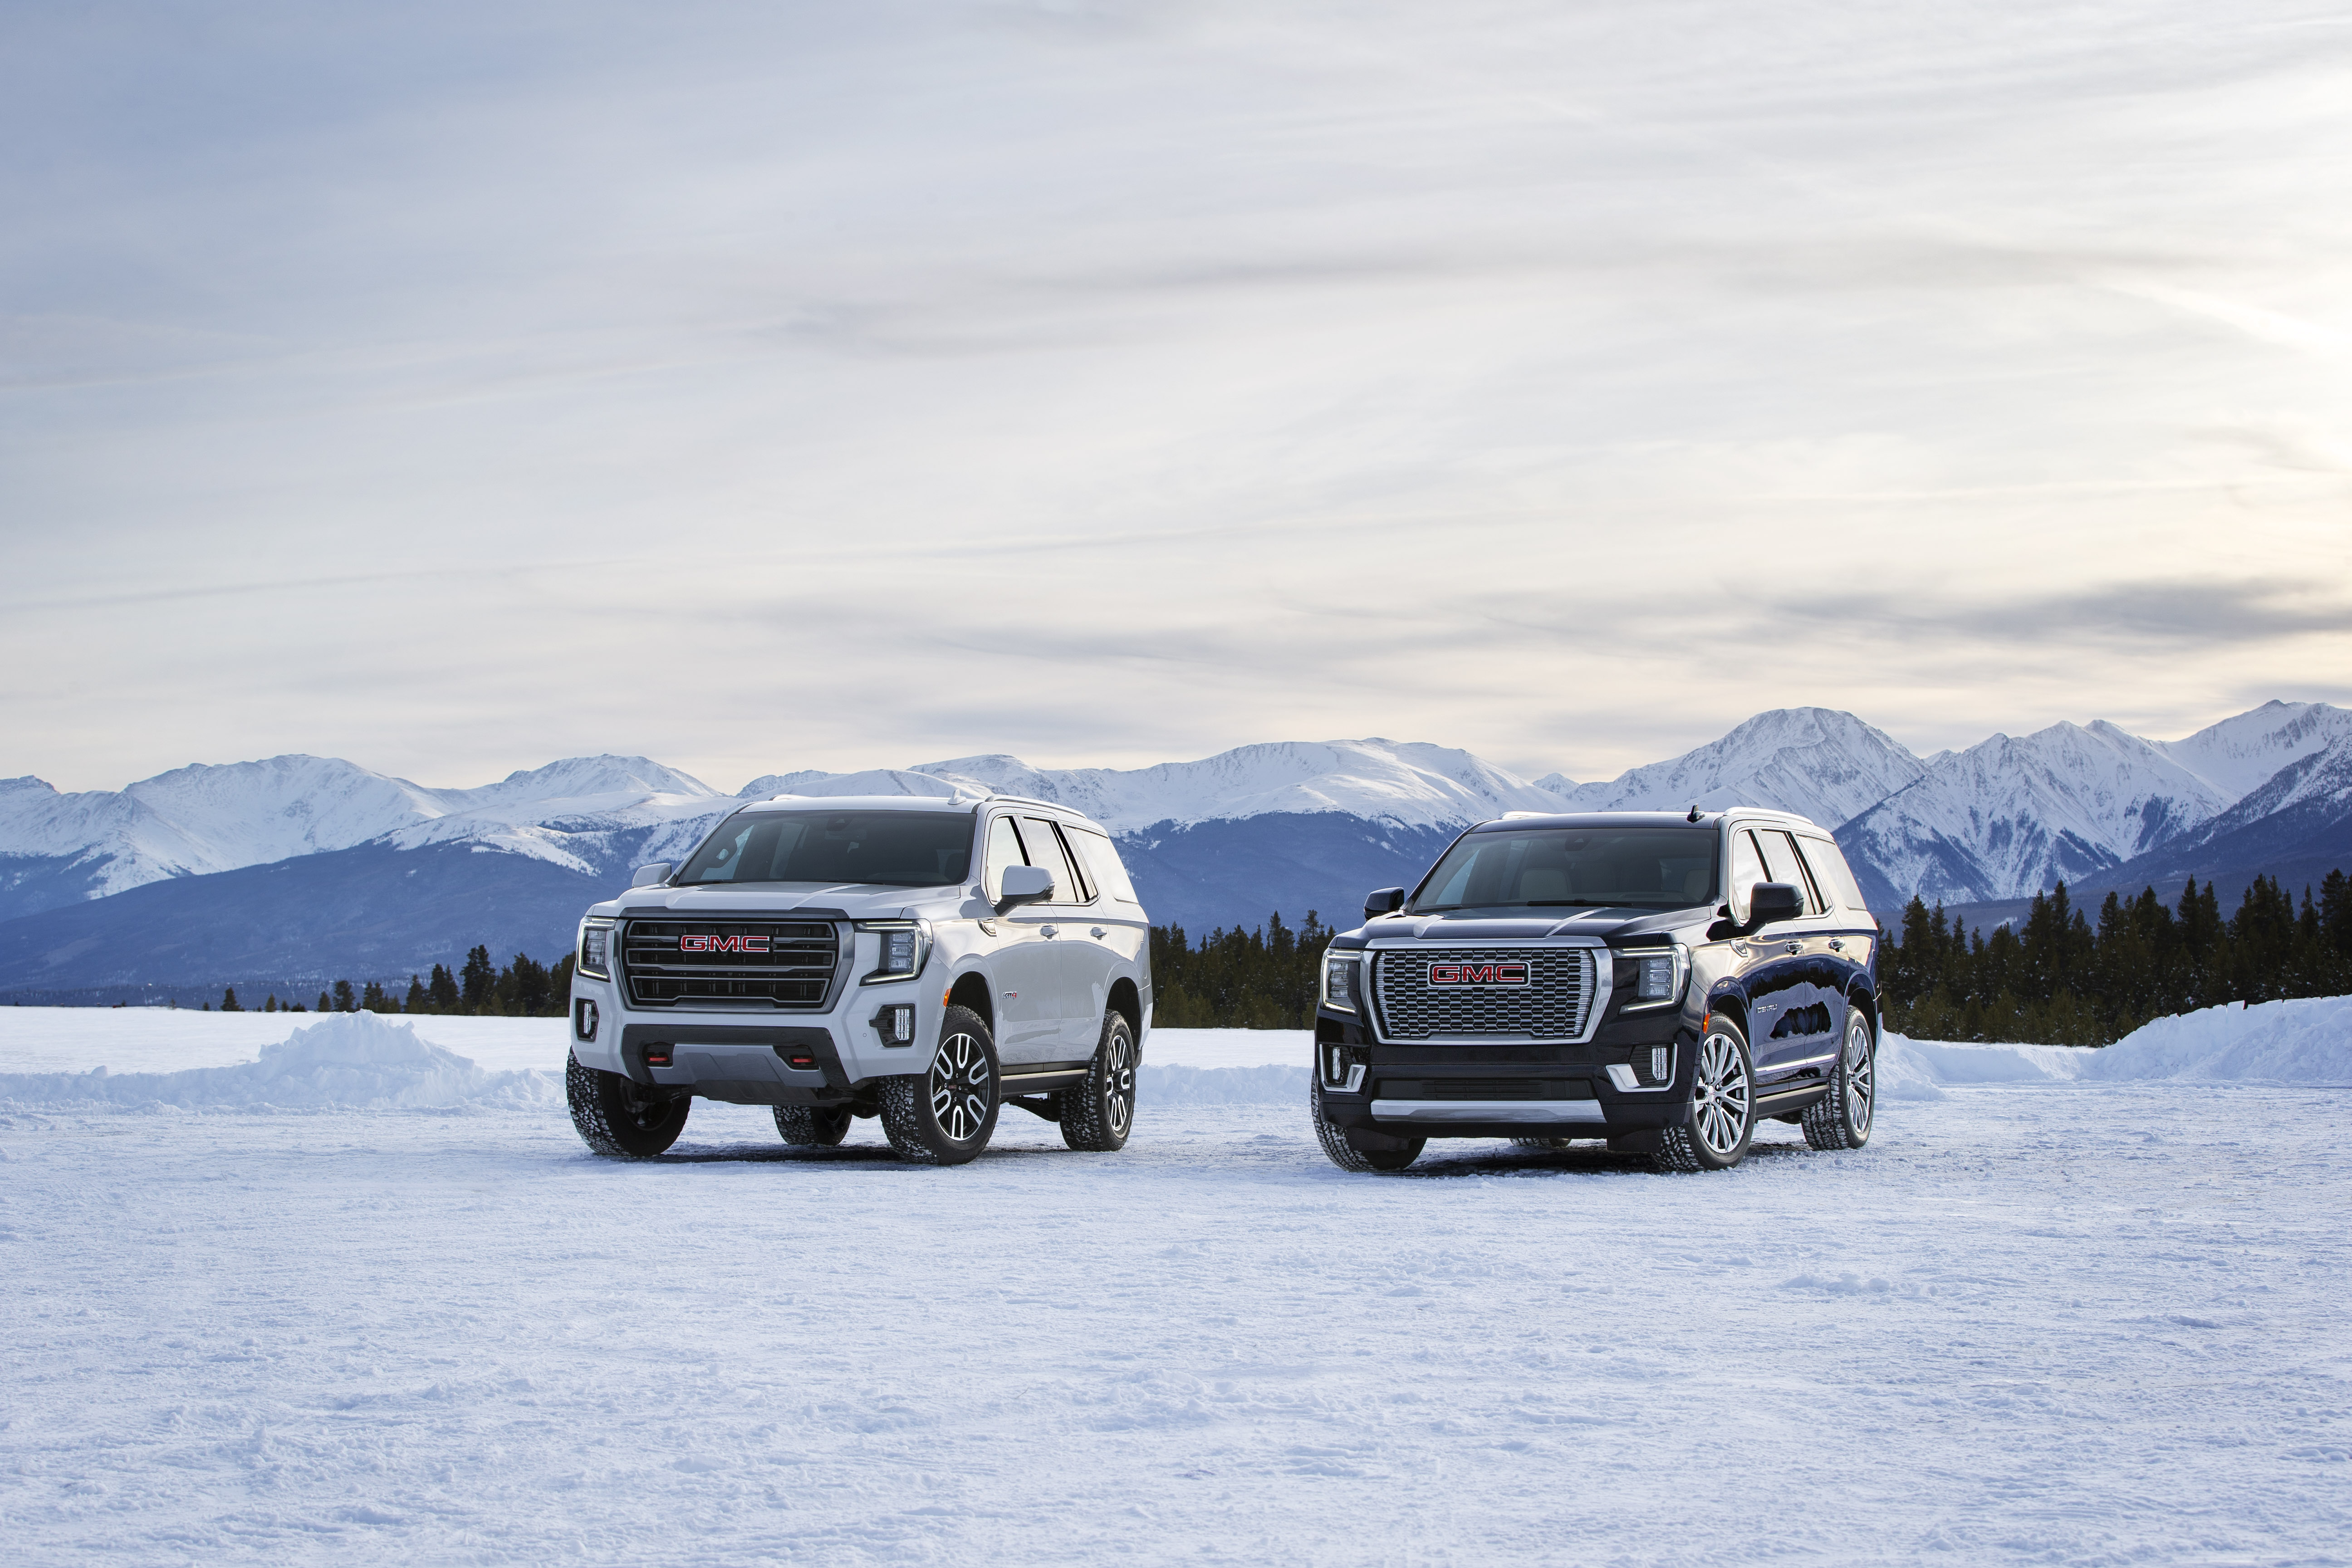 2021 GMC Yukon gets new features, diesel, AT4 offroad, a nicer Denali